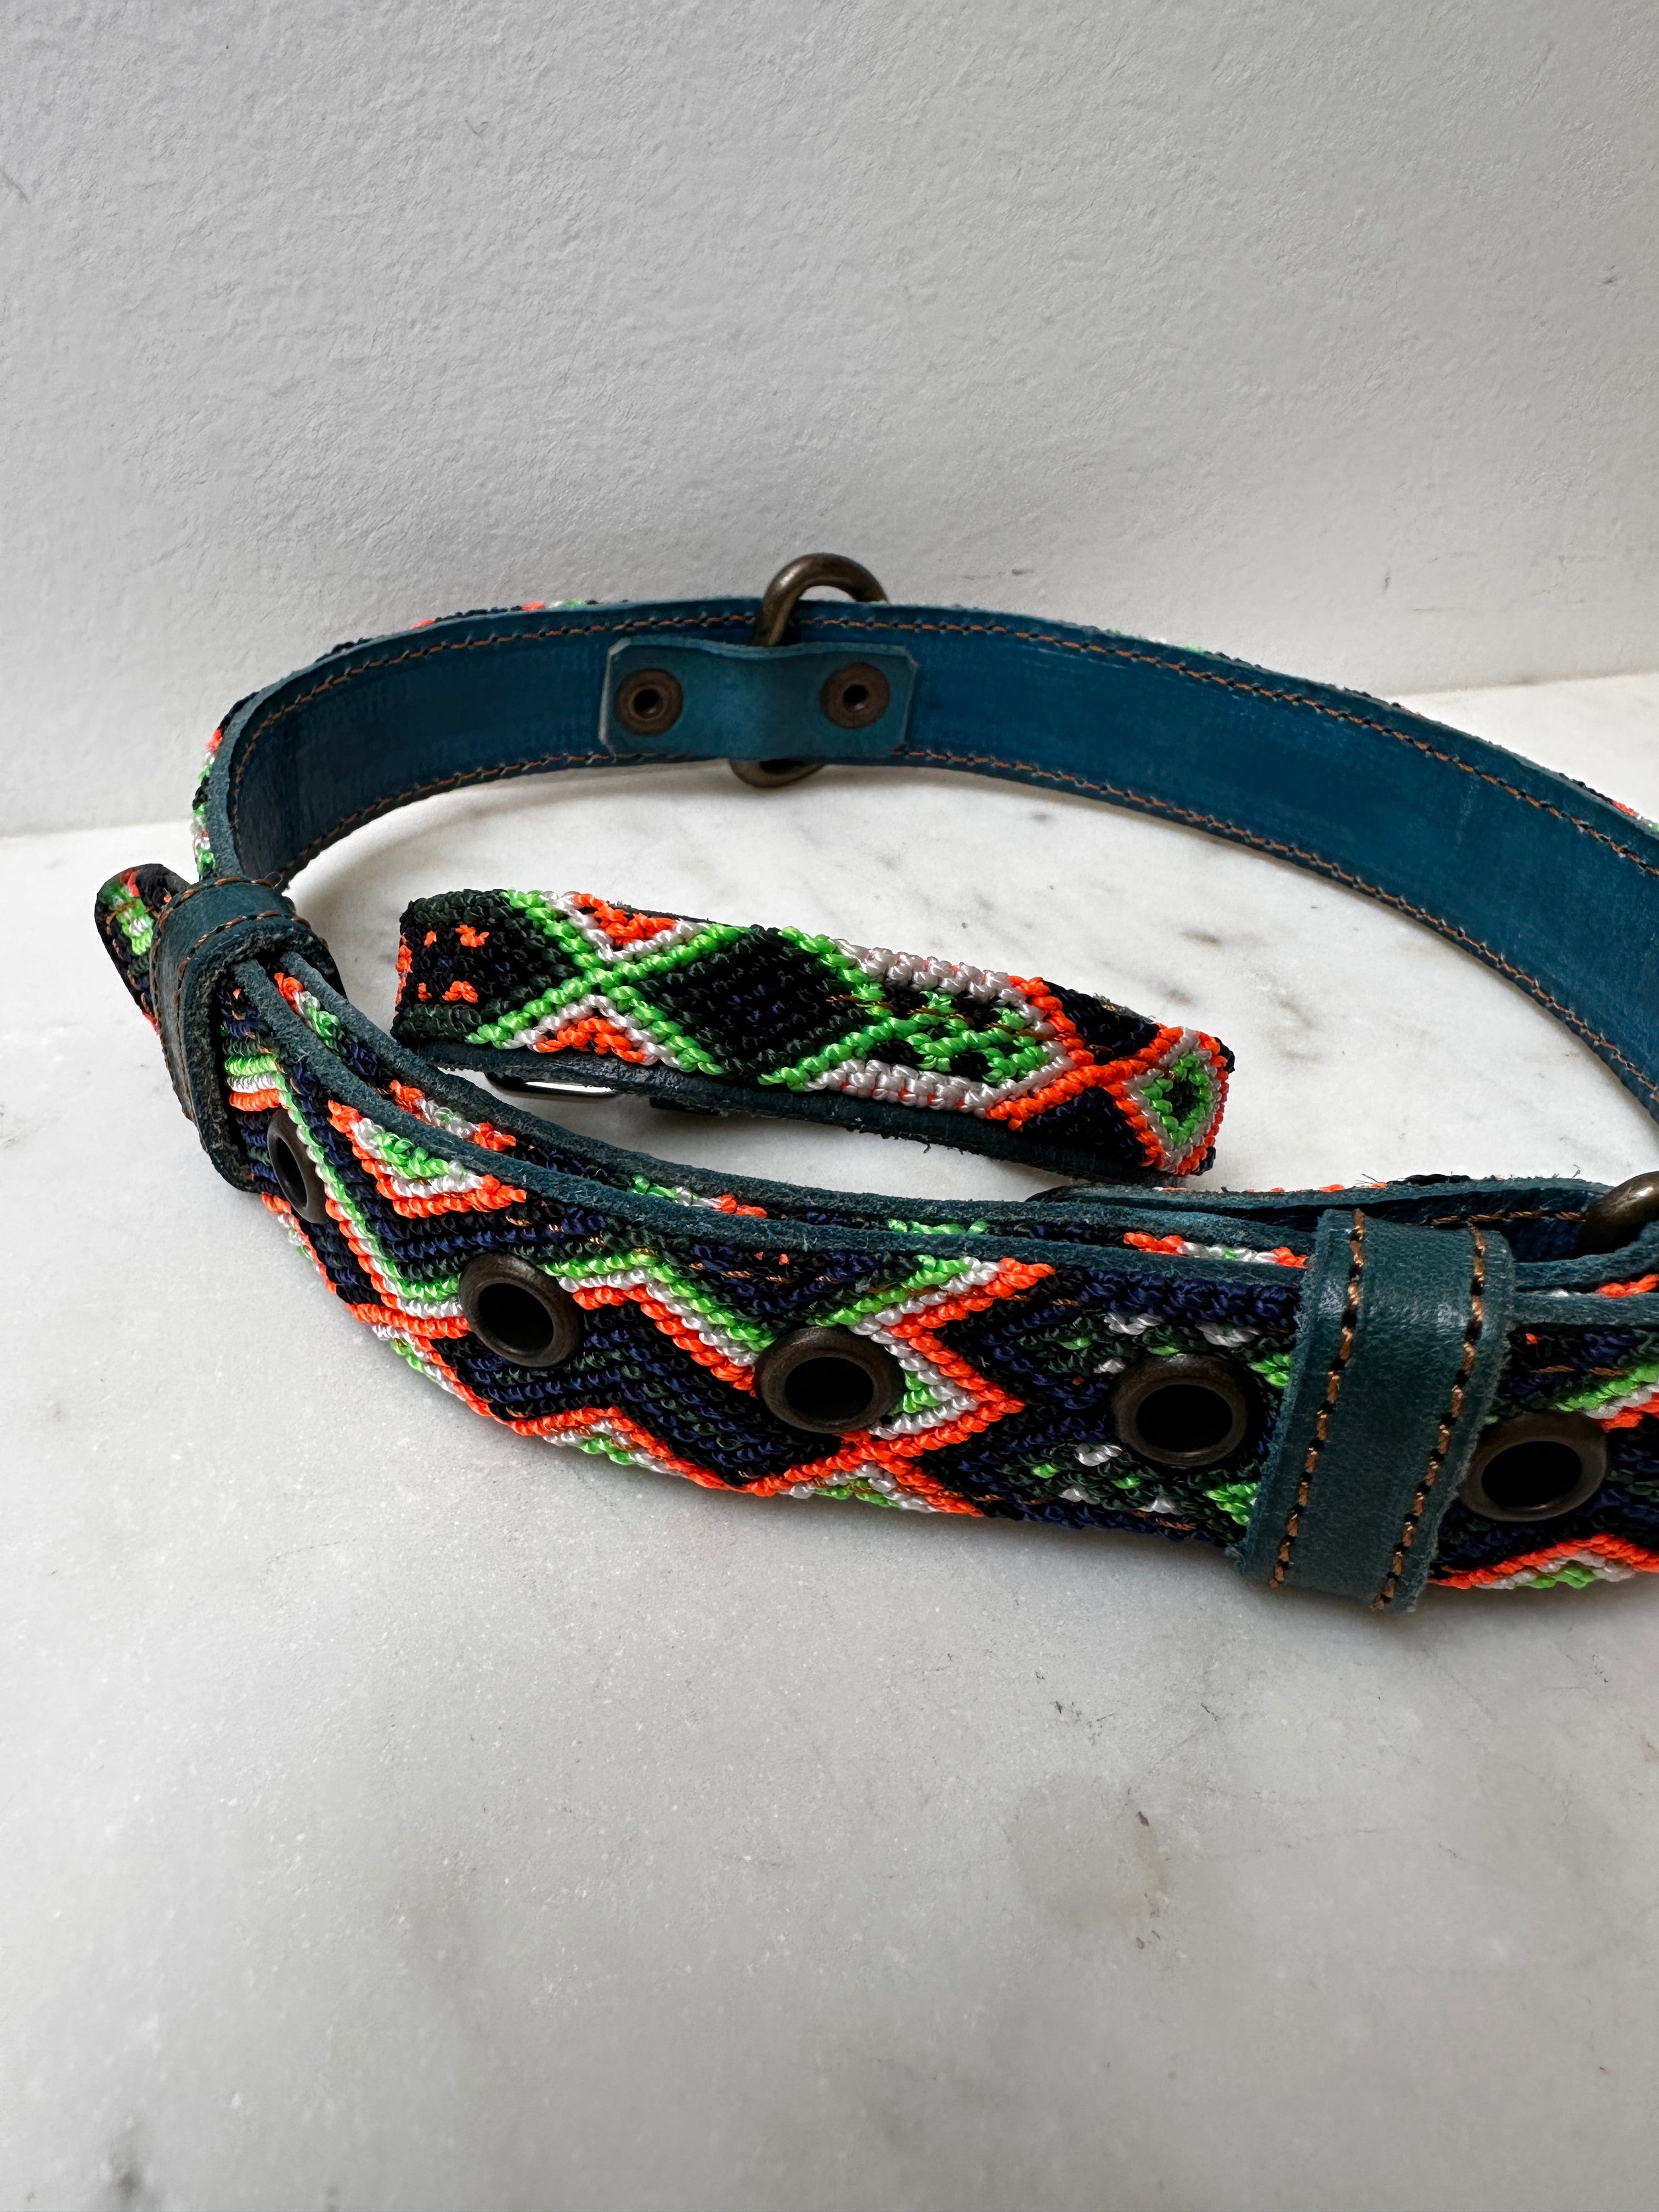 Future Nomads Homewares One Size Huichol Fully Embroidered Dog Collar L4